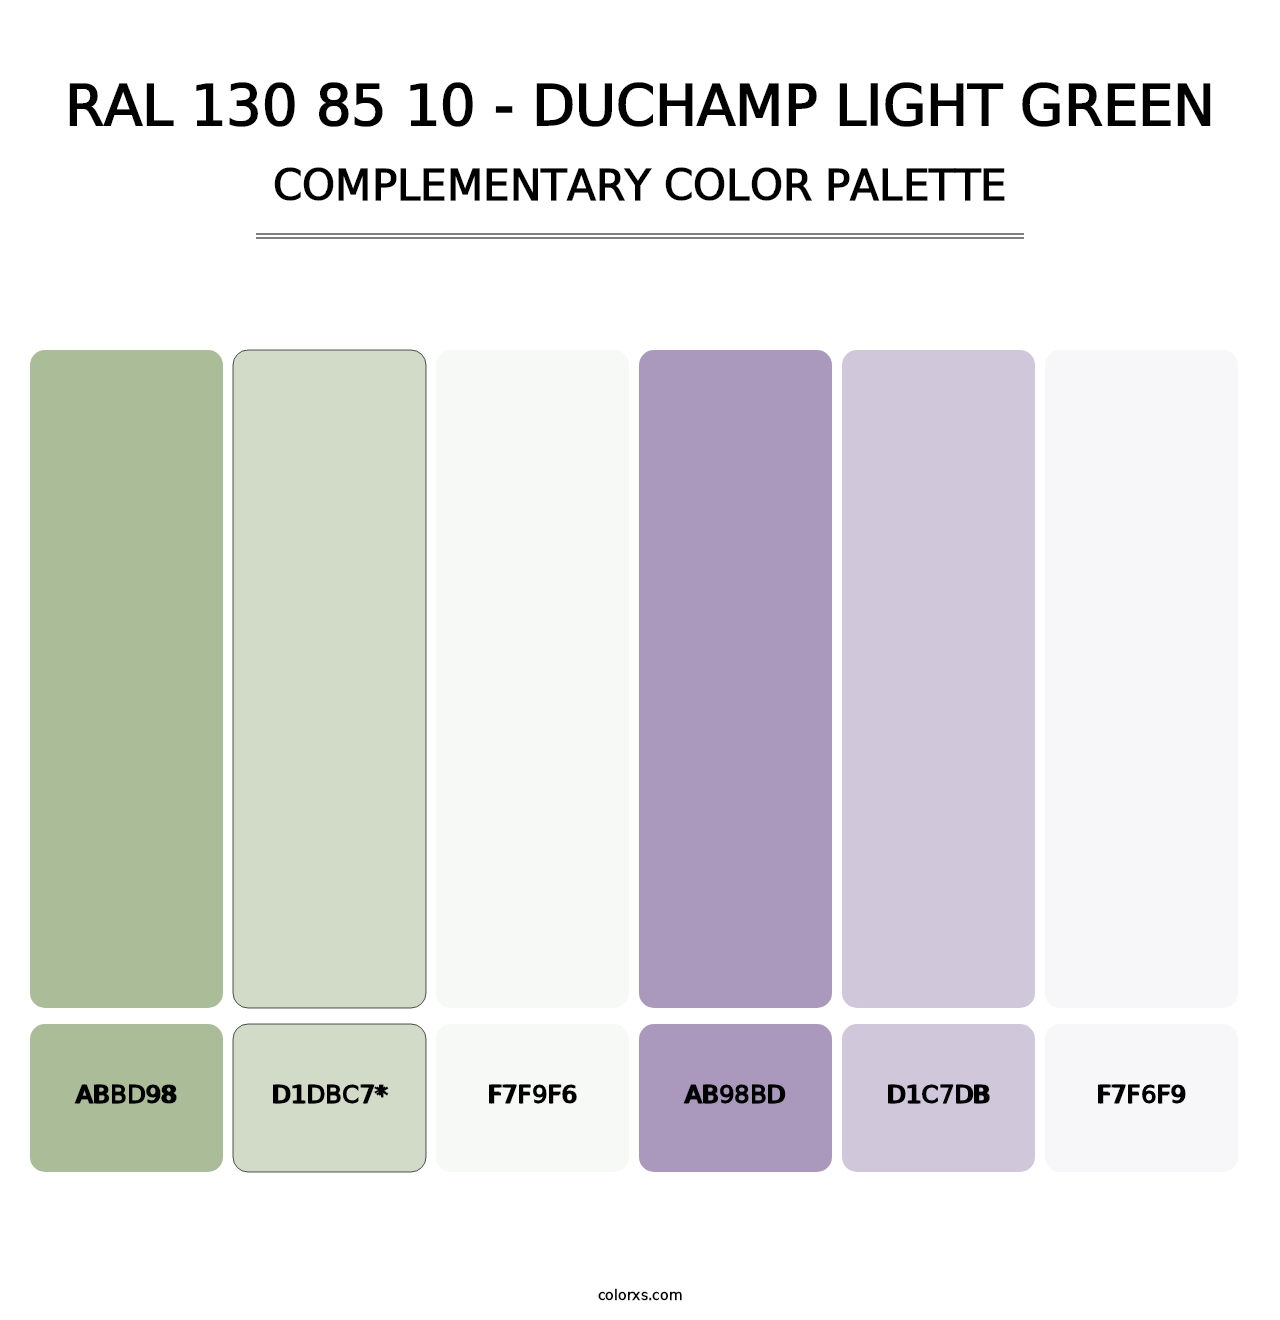 RAL 130 85 10 - Duchamp Light Green - Complementary Color Palette